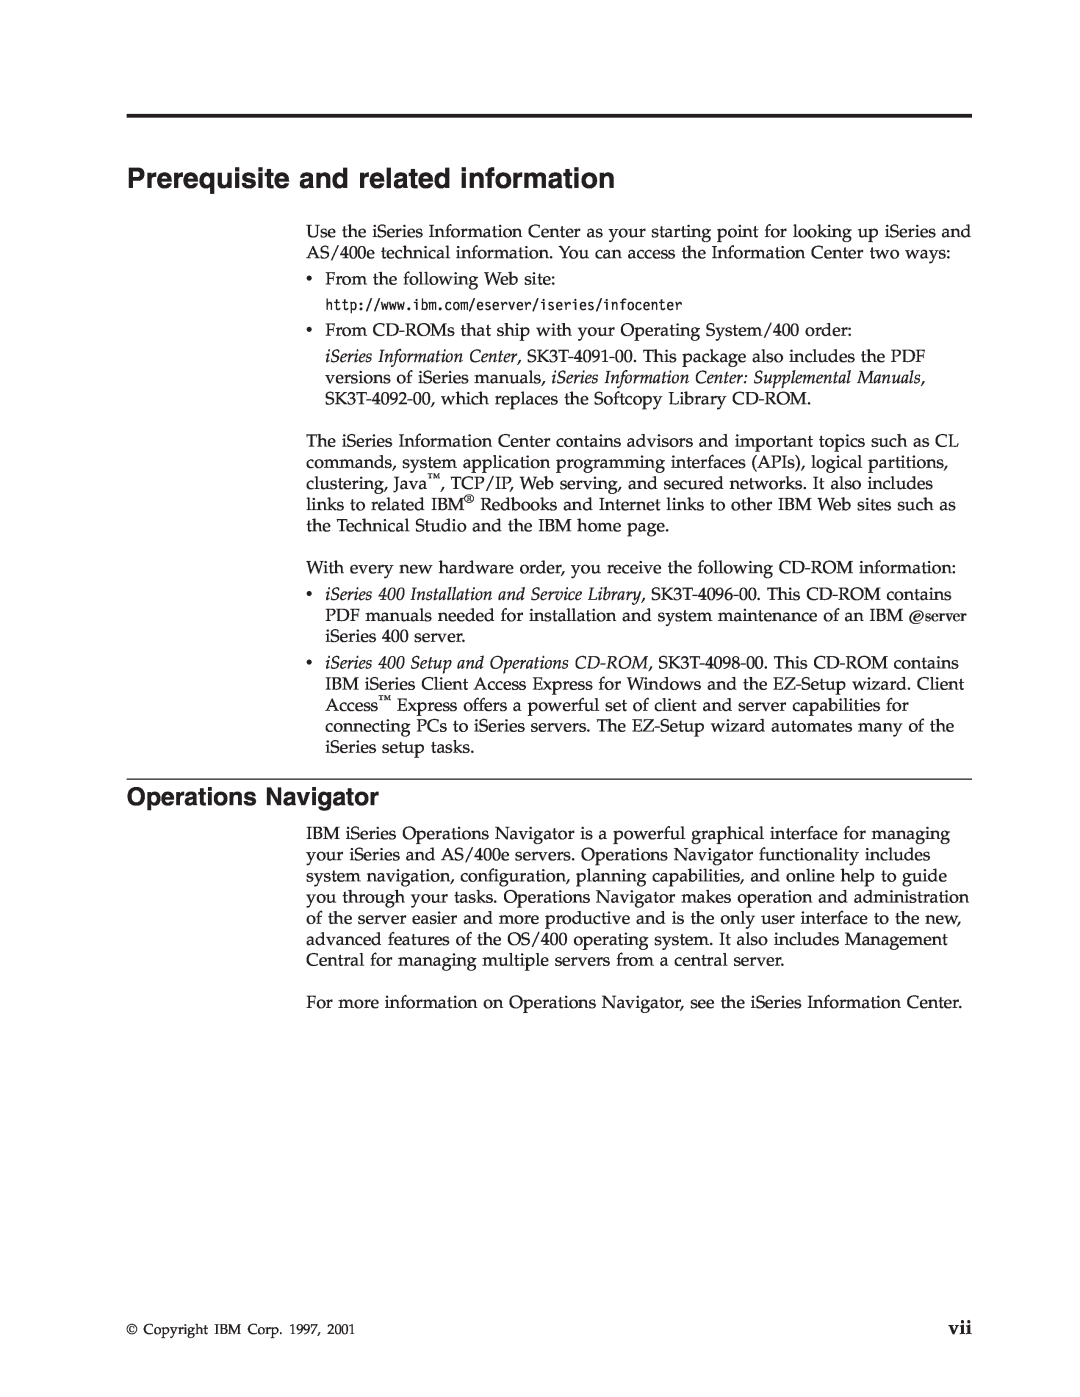 IBM SC41-5420-04 manual Prerequisite and related information, Operations Navigator 